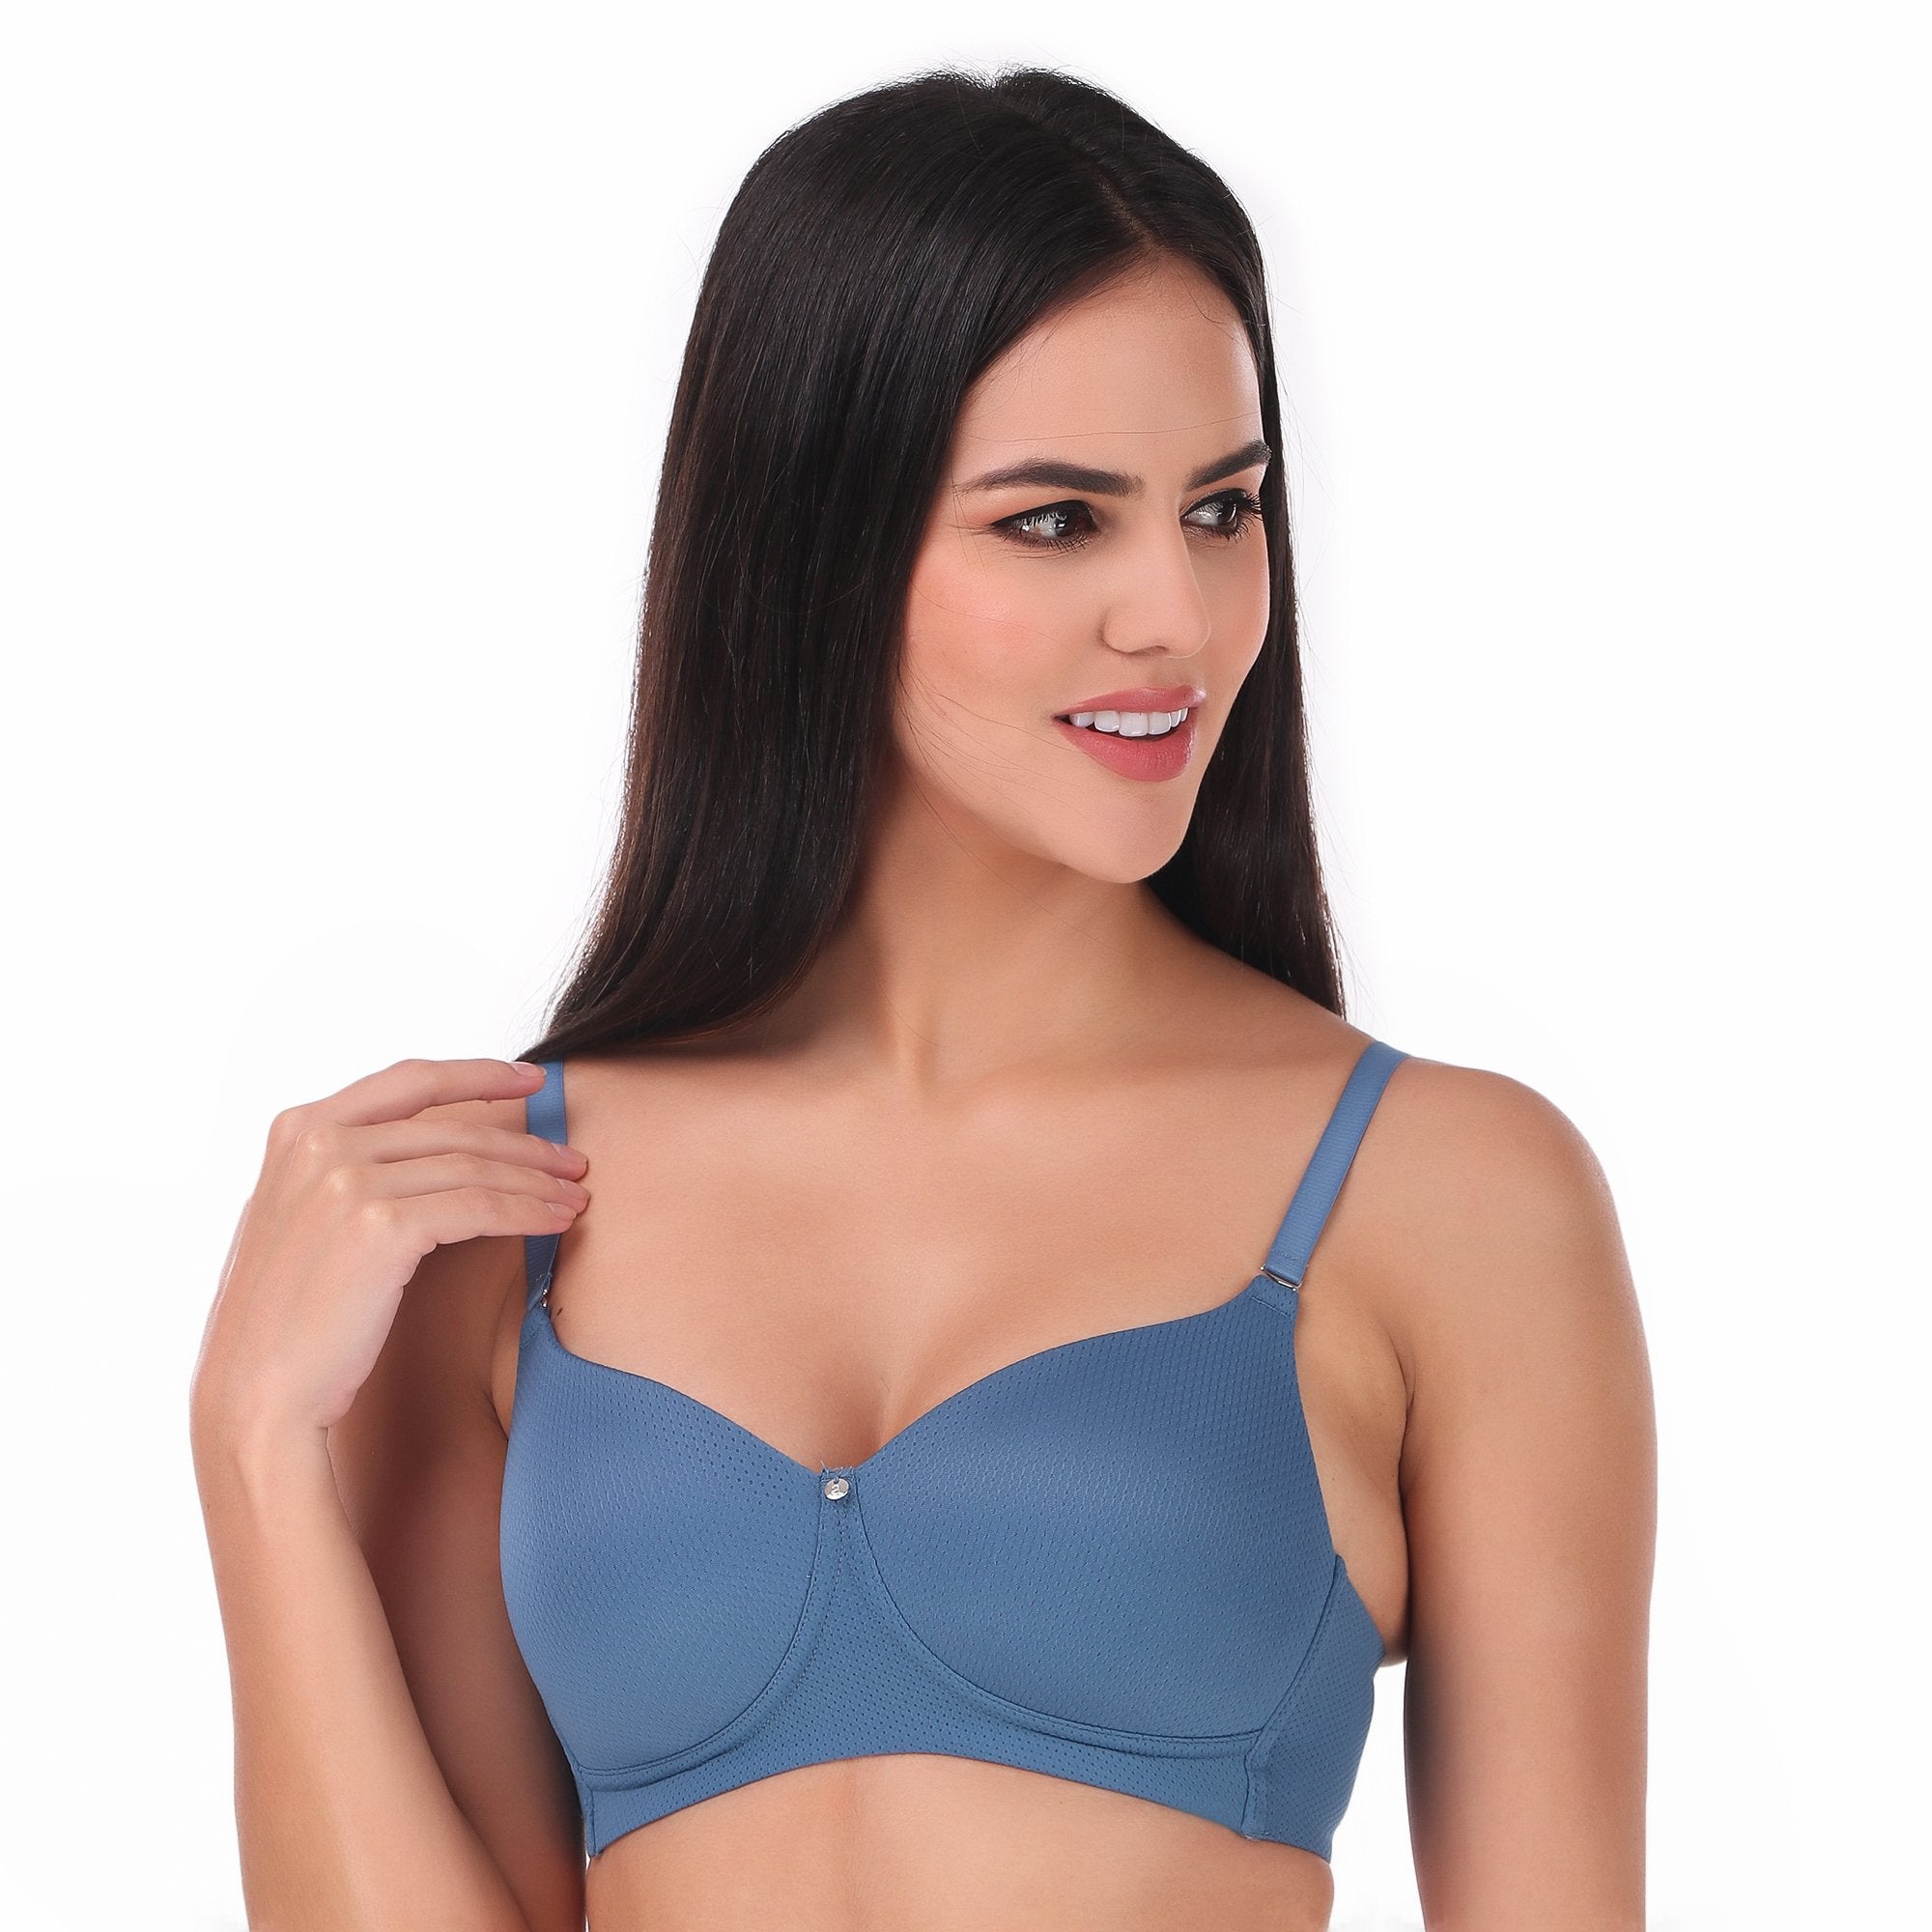 AMANTE-BRA75601 Stay Cool - Padded Non-Wired Cooling Bra